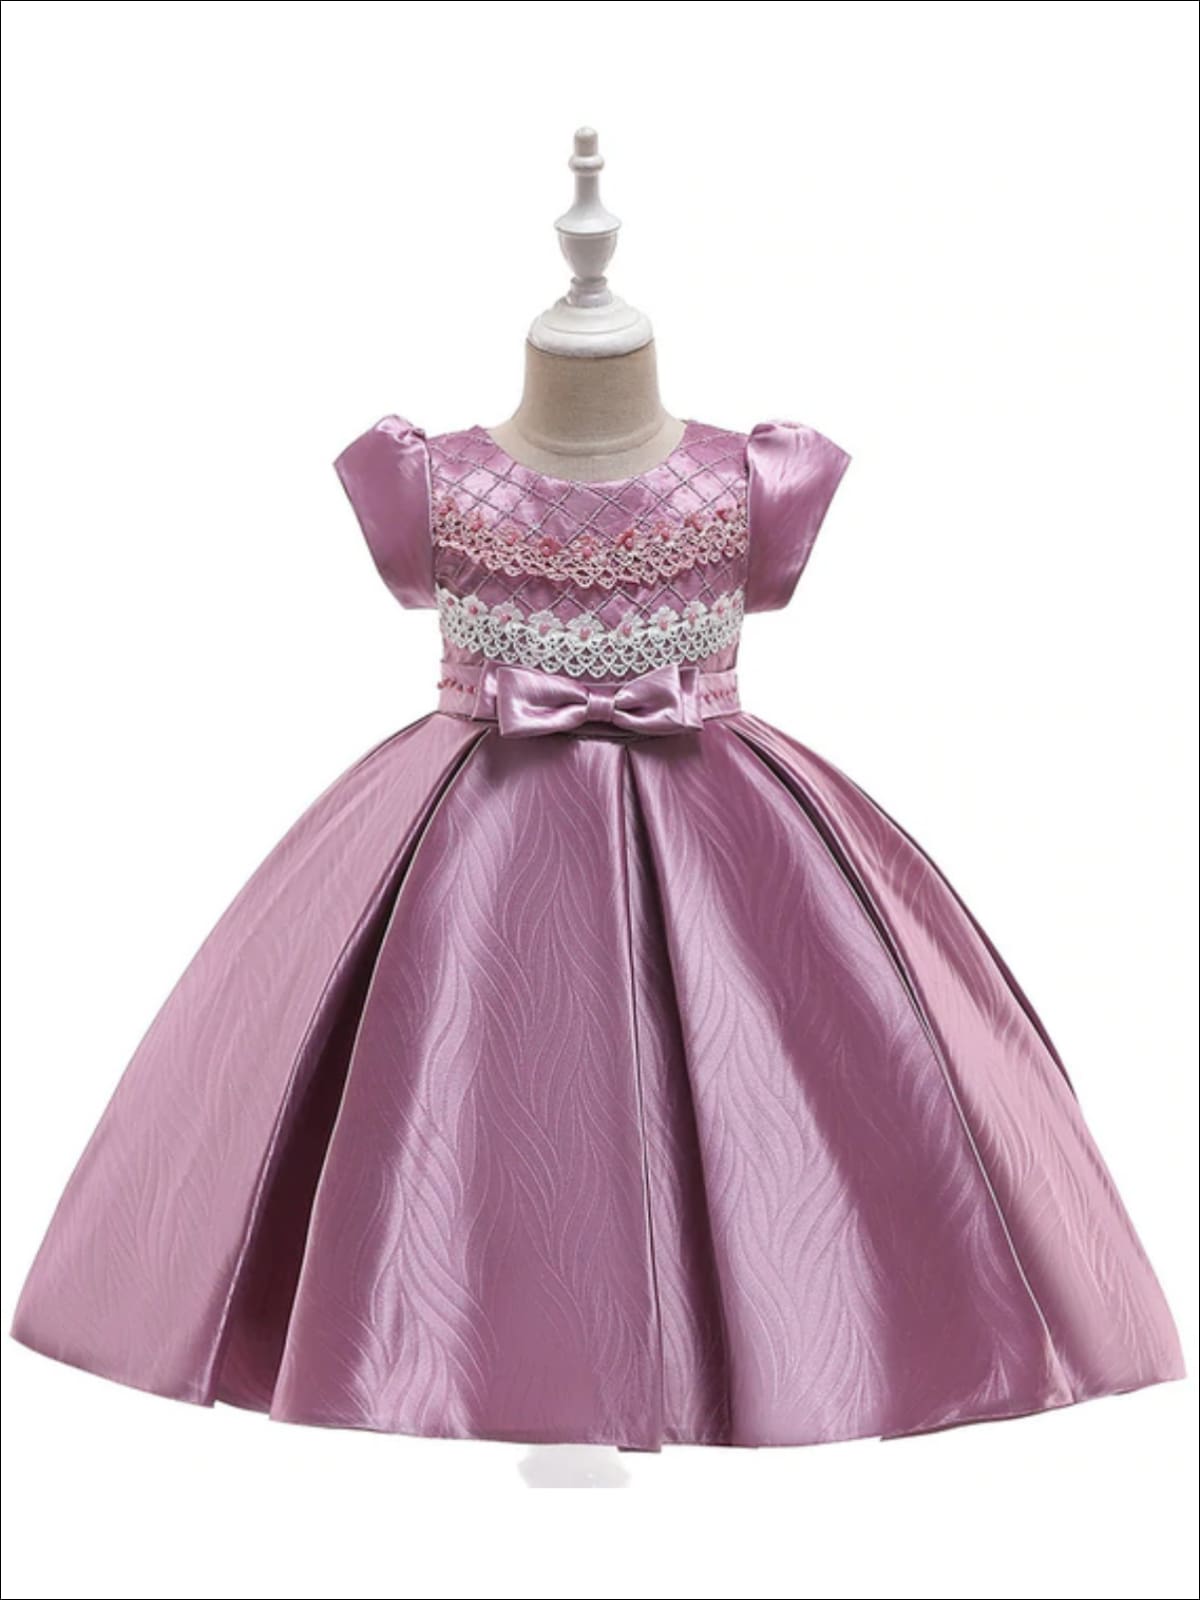 Girls Formal Dresses |  Satin Embroidered Lace Applique Party Dress